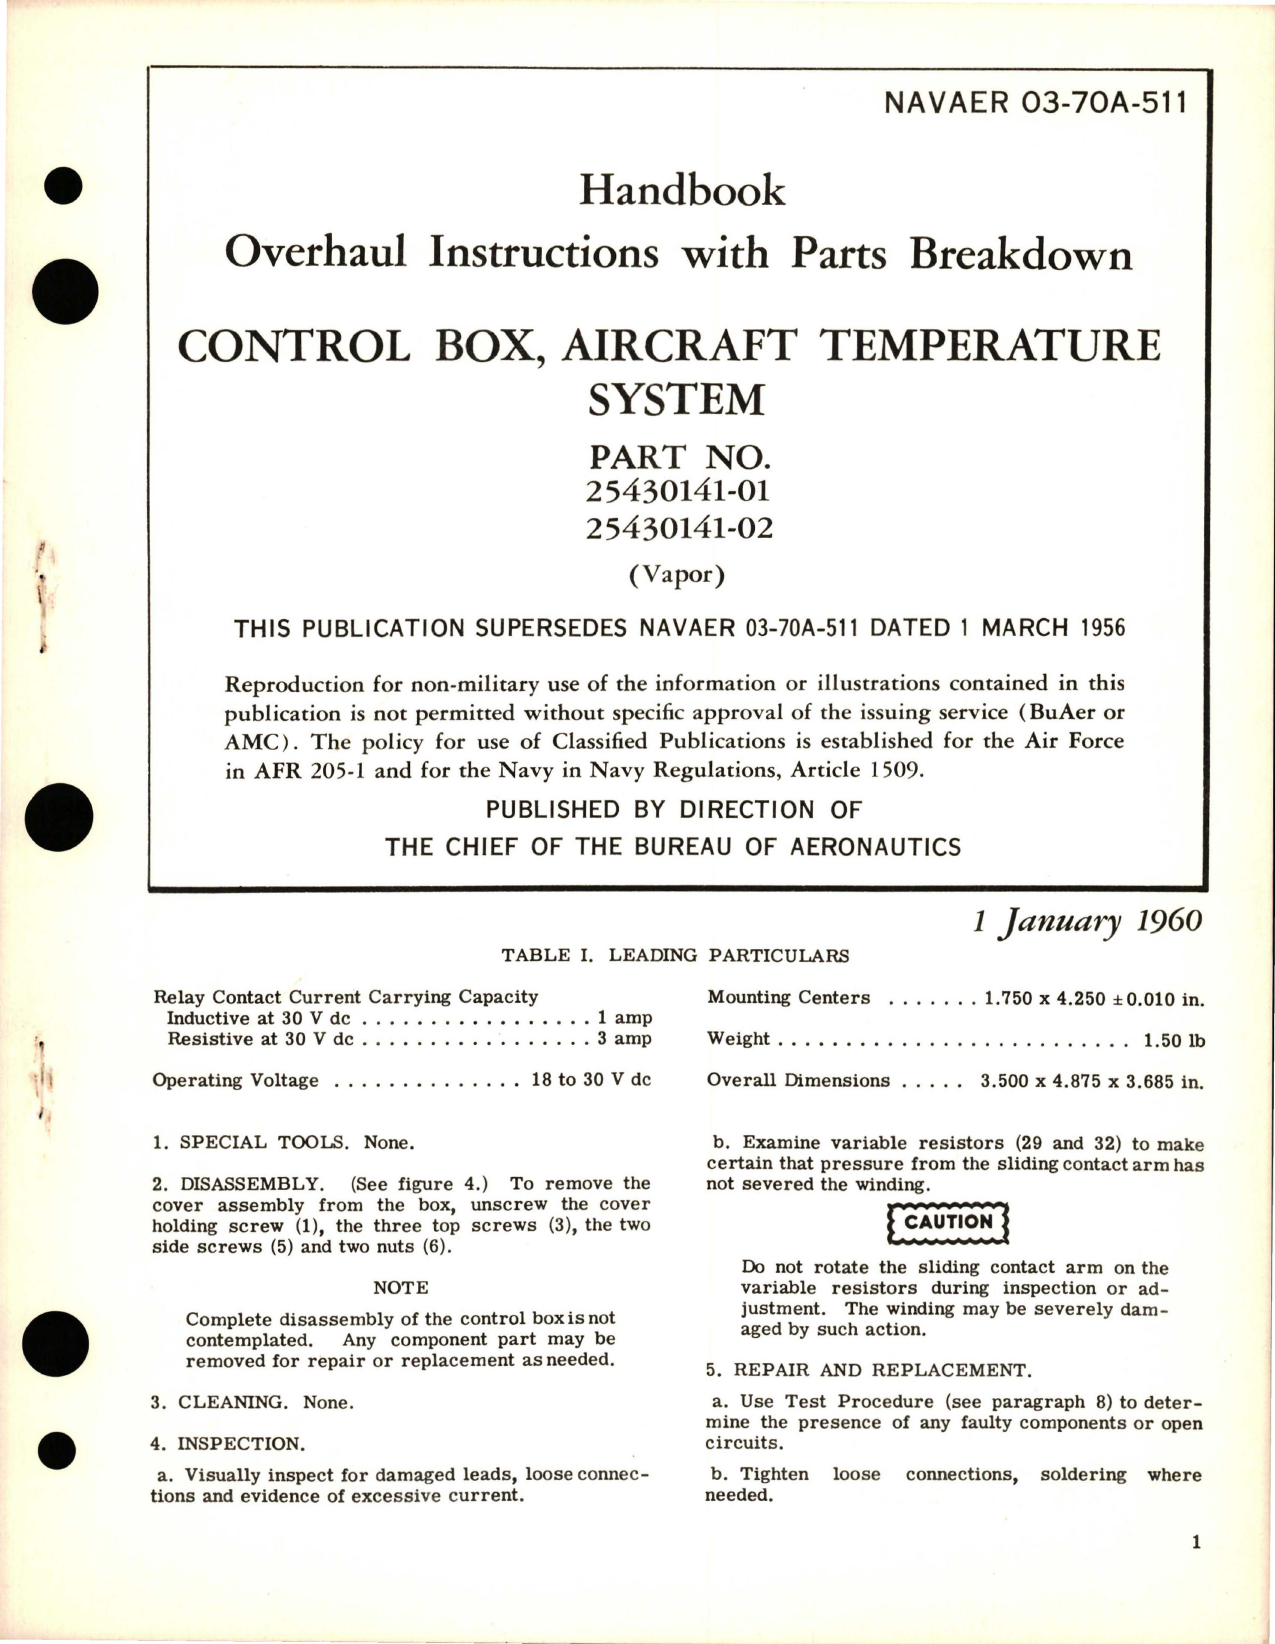 Sample page 1 from AirCorps Library document: Overhaul Instructions with Parts Breakdown for Temperature System Control Box - Parts 25430141-41 and 25430141-02